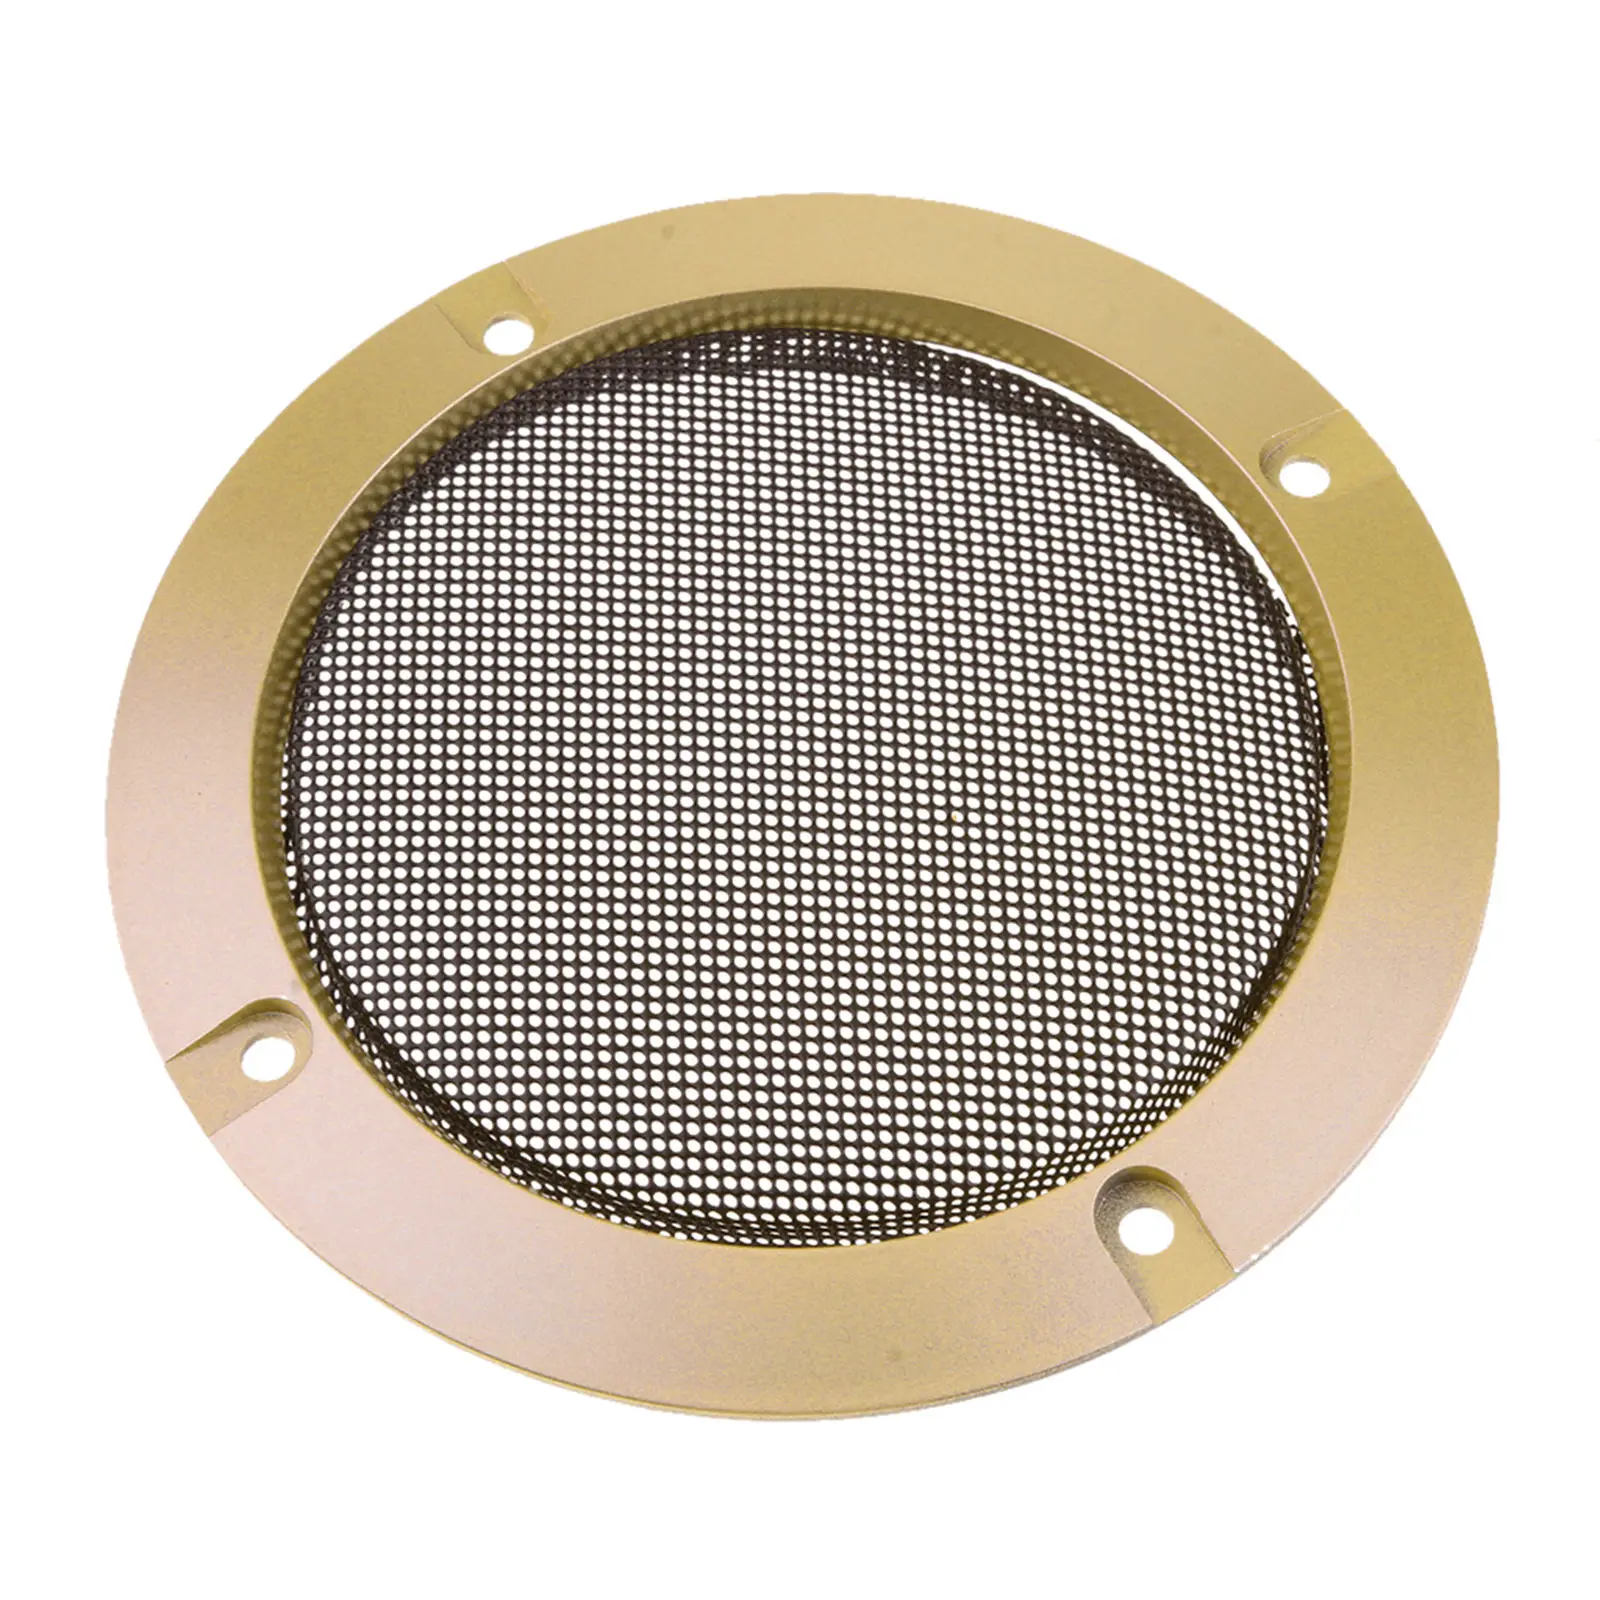 4 Inch Speaker Grills Cover Case with 4 pcs Screws for Speaker Mounting Home Audio DIY -124mm Outer Diameter Gold